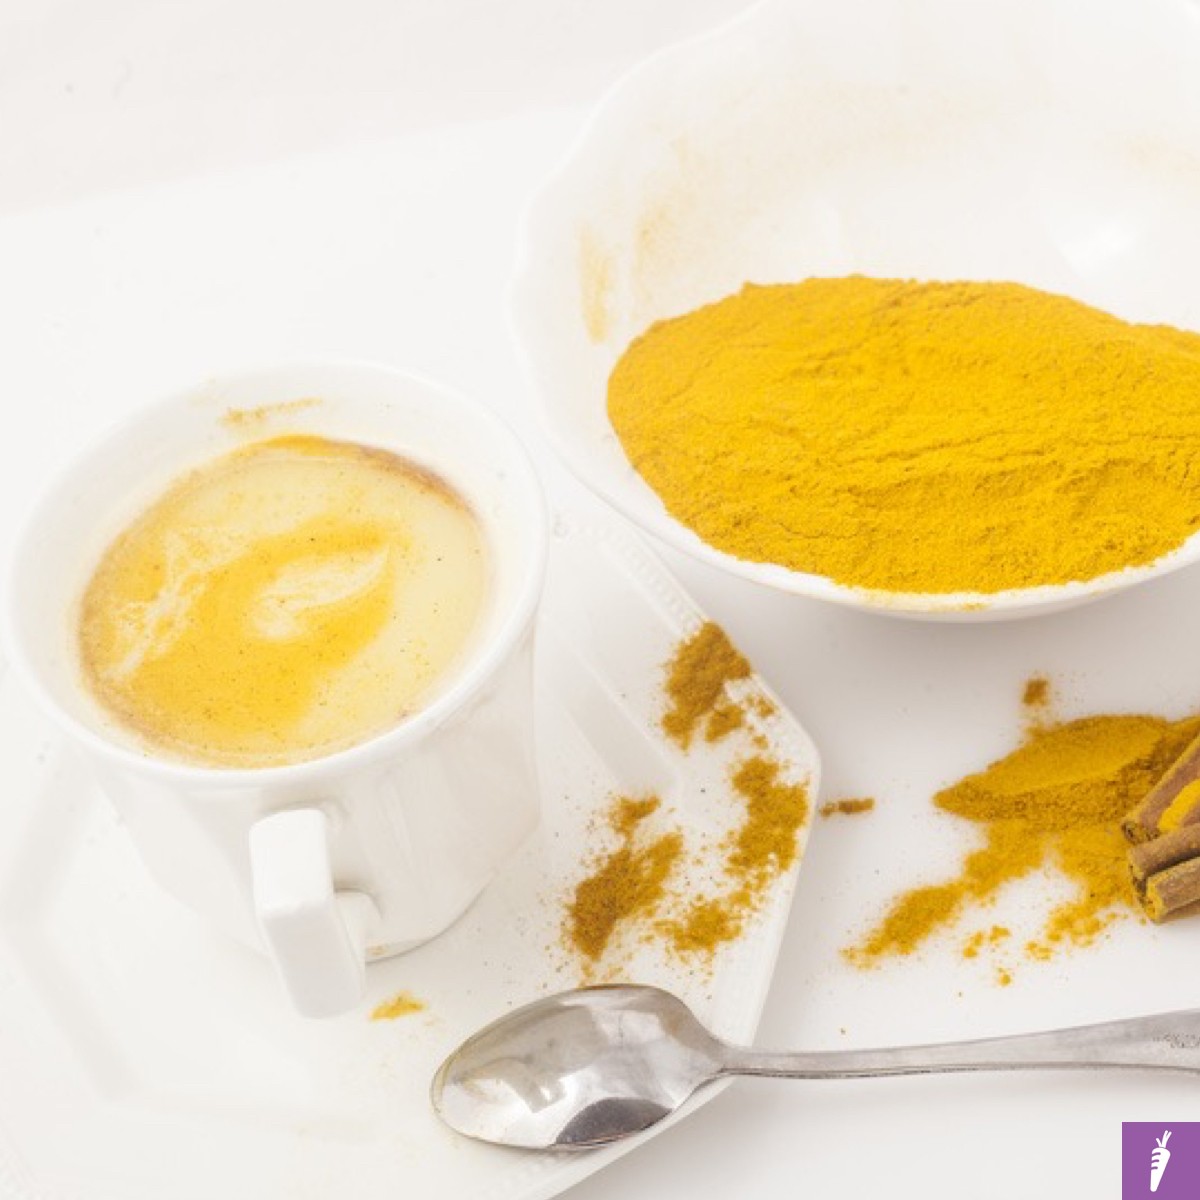 Turmeric Lattes – My Current Drink of Choice